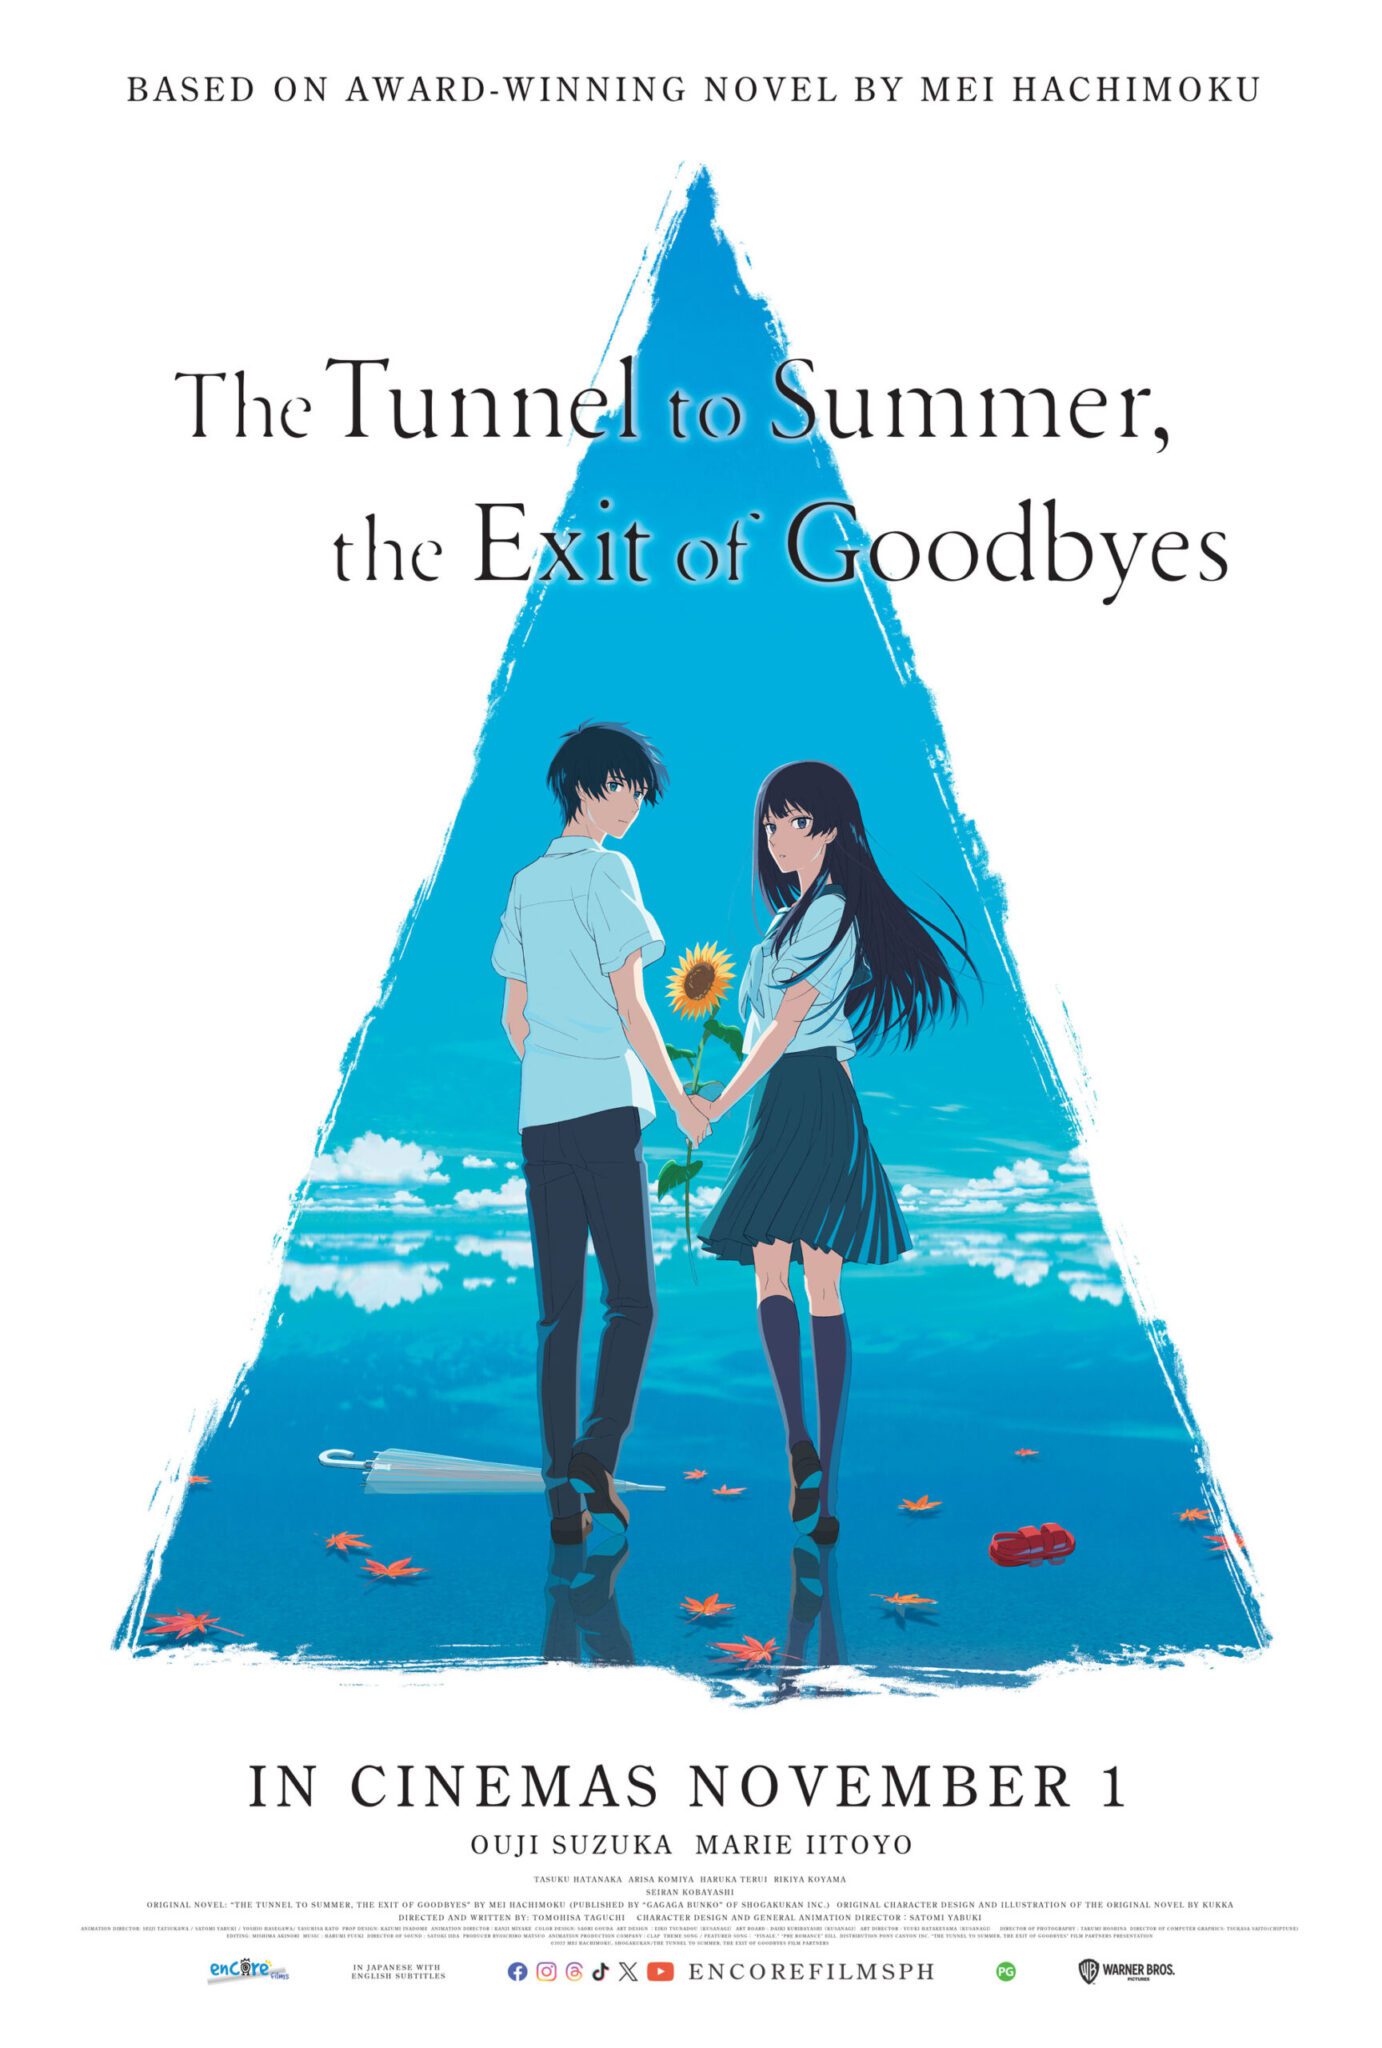 HEARTWARMING TEARJERKER DATE MOVIE “THE TUNNEL TO SUMMER, THE EXIT OF GOODBYES” Opens November 1 Exclusive at SM Cinemas